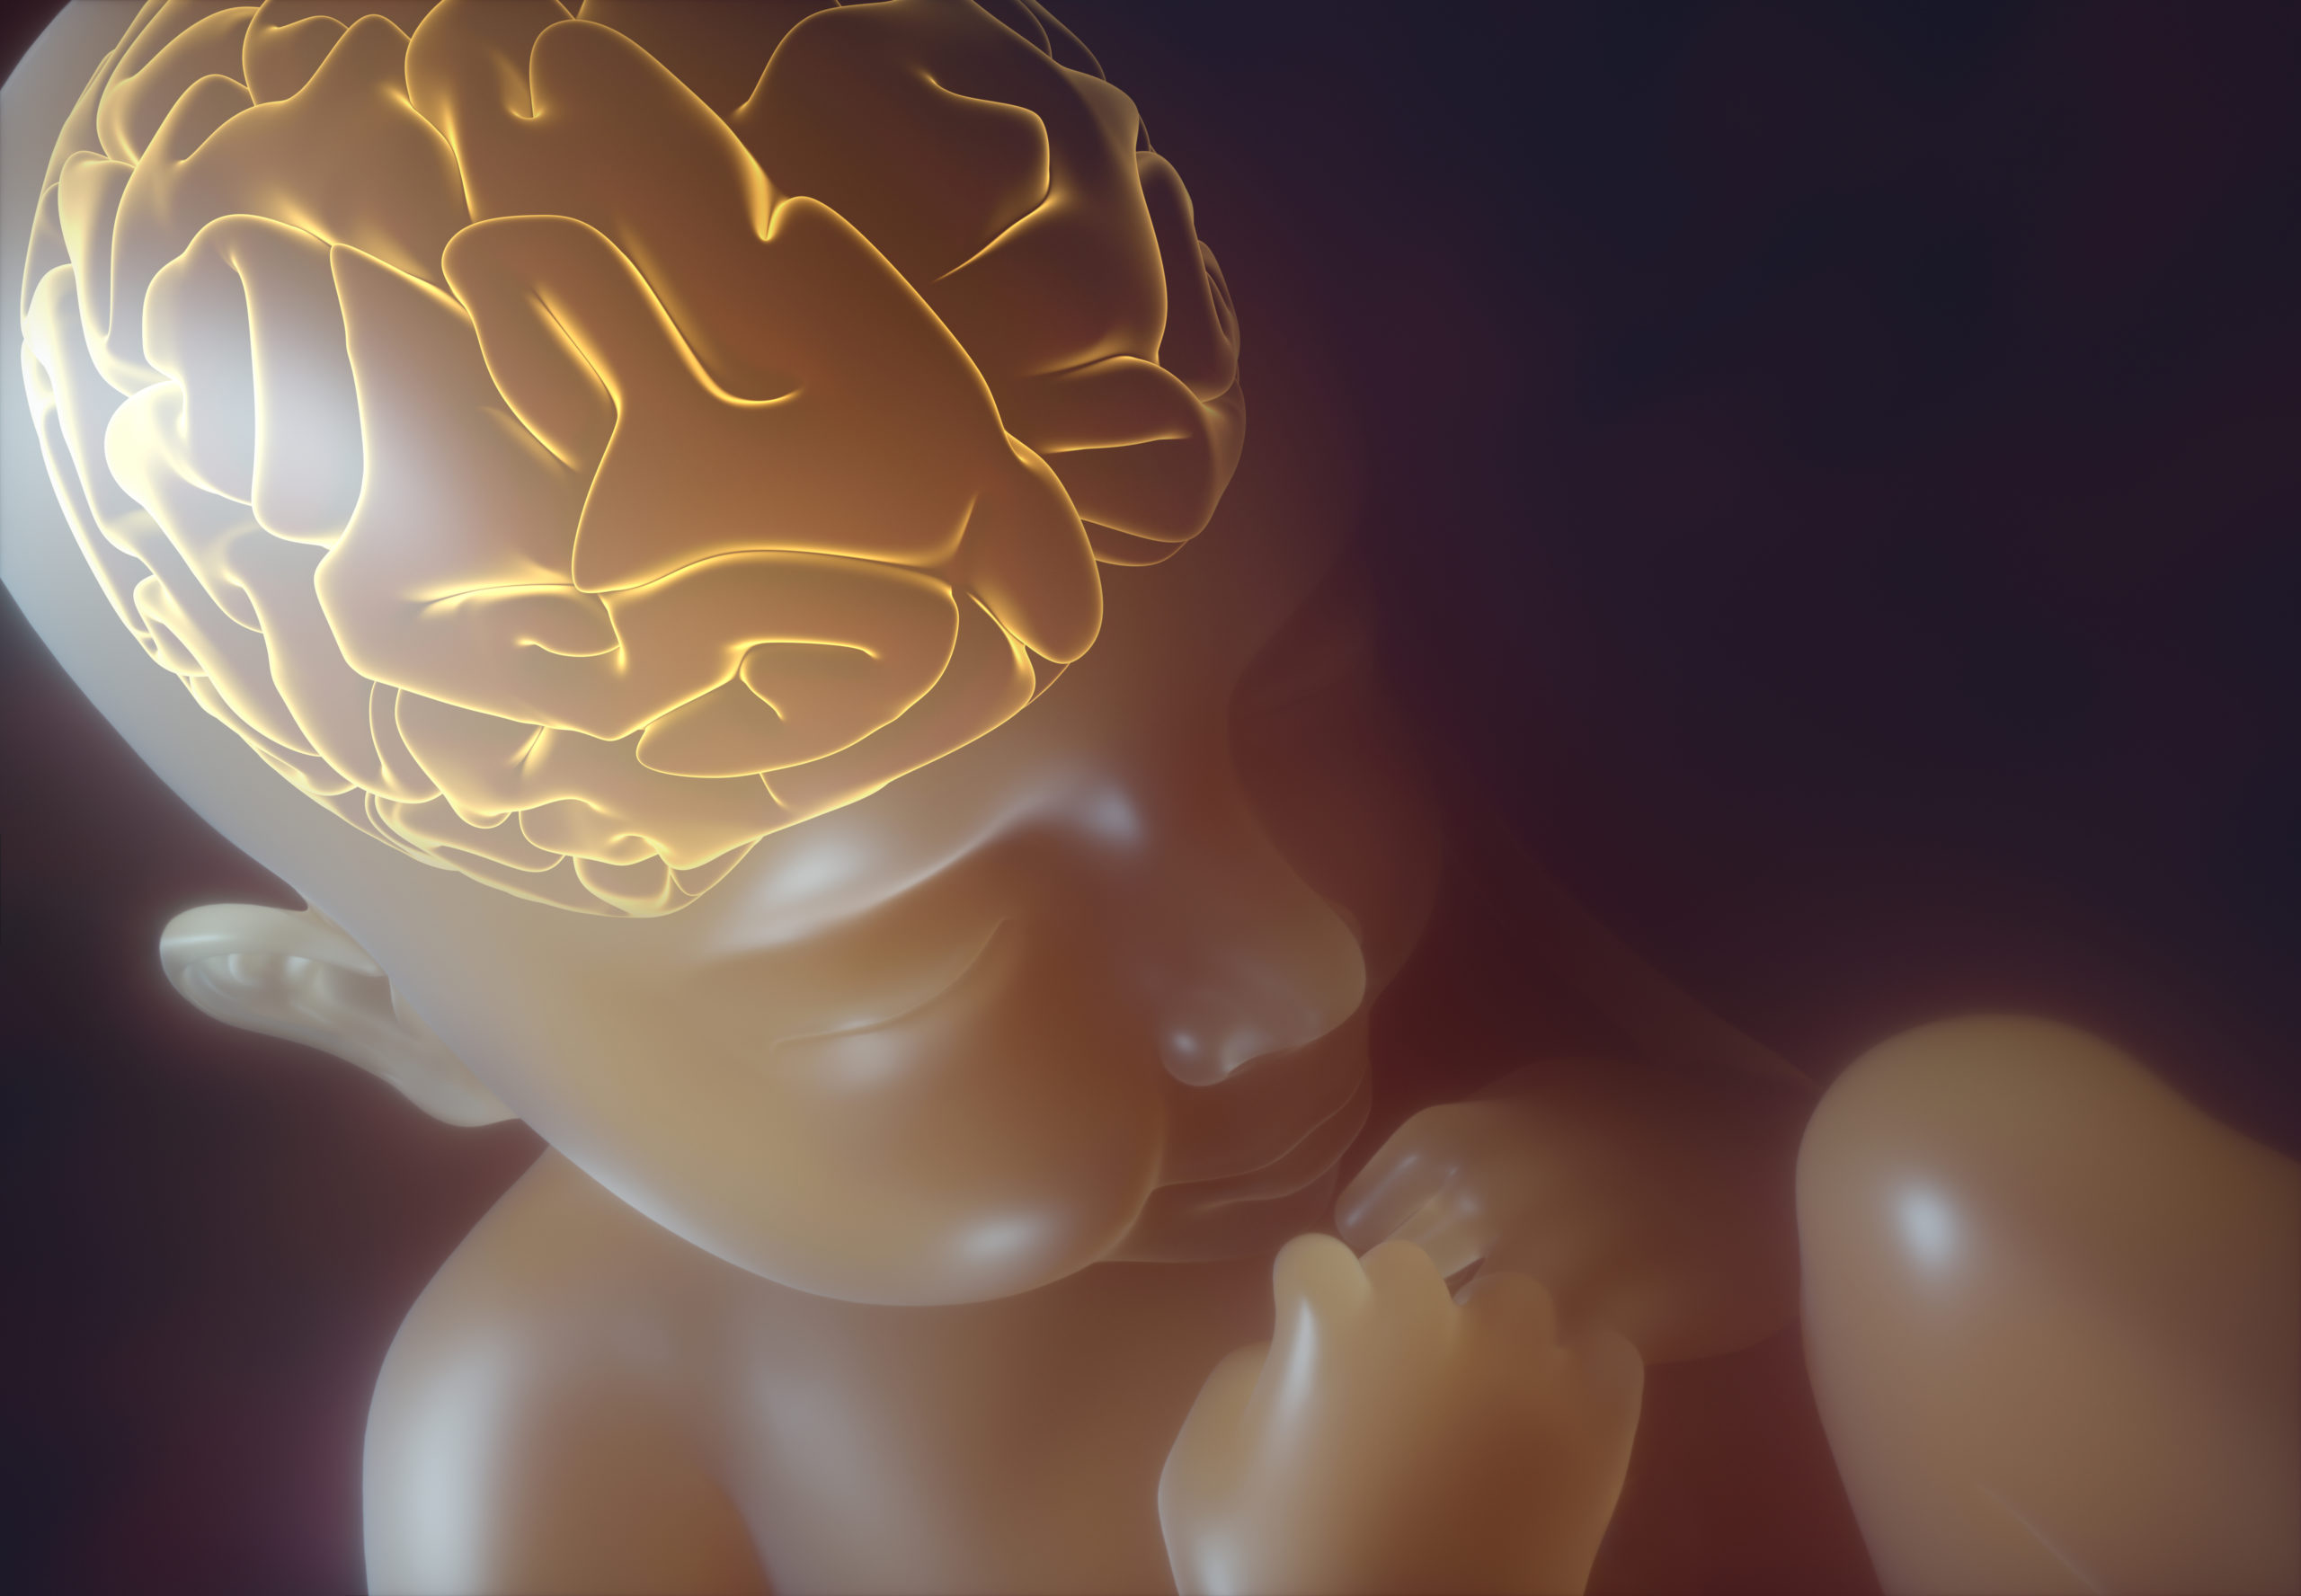 3D illustration. Image of a baby inside the womb.